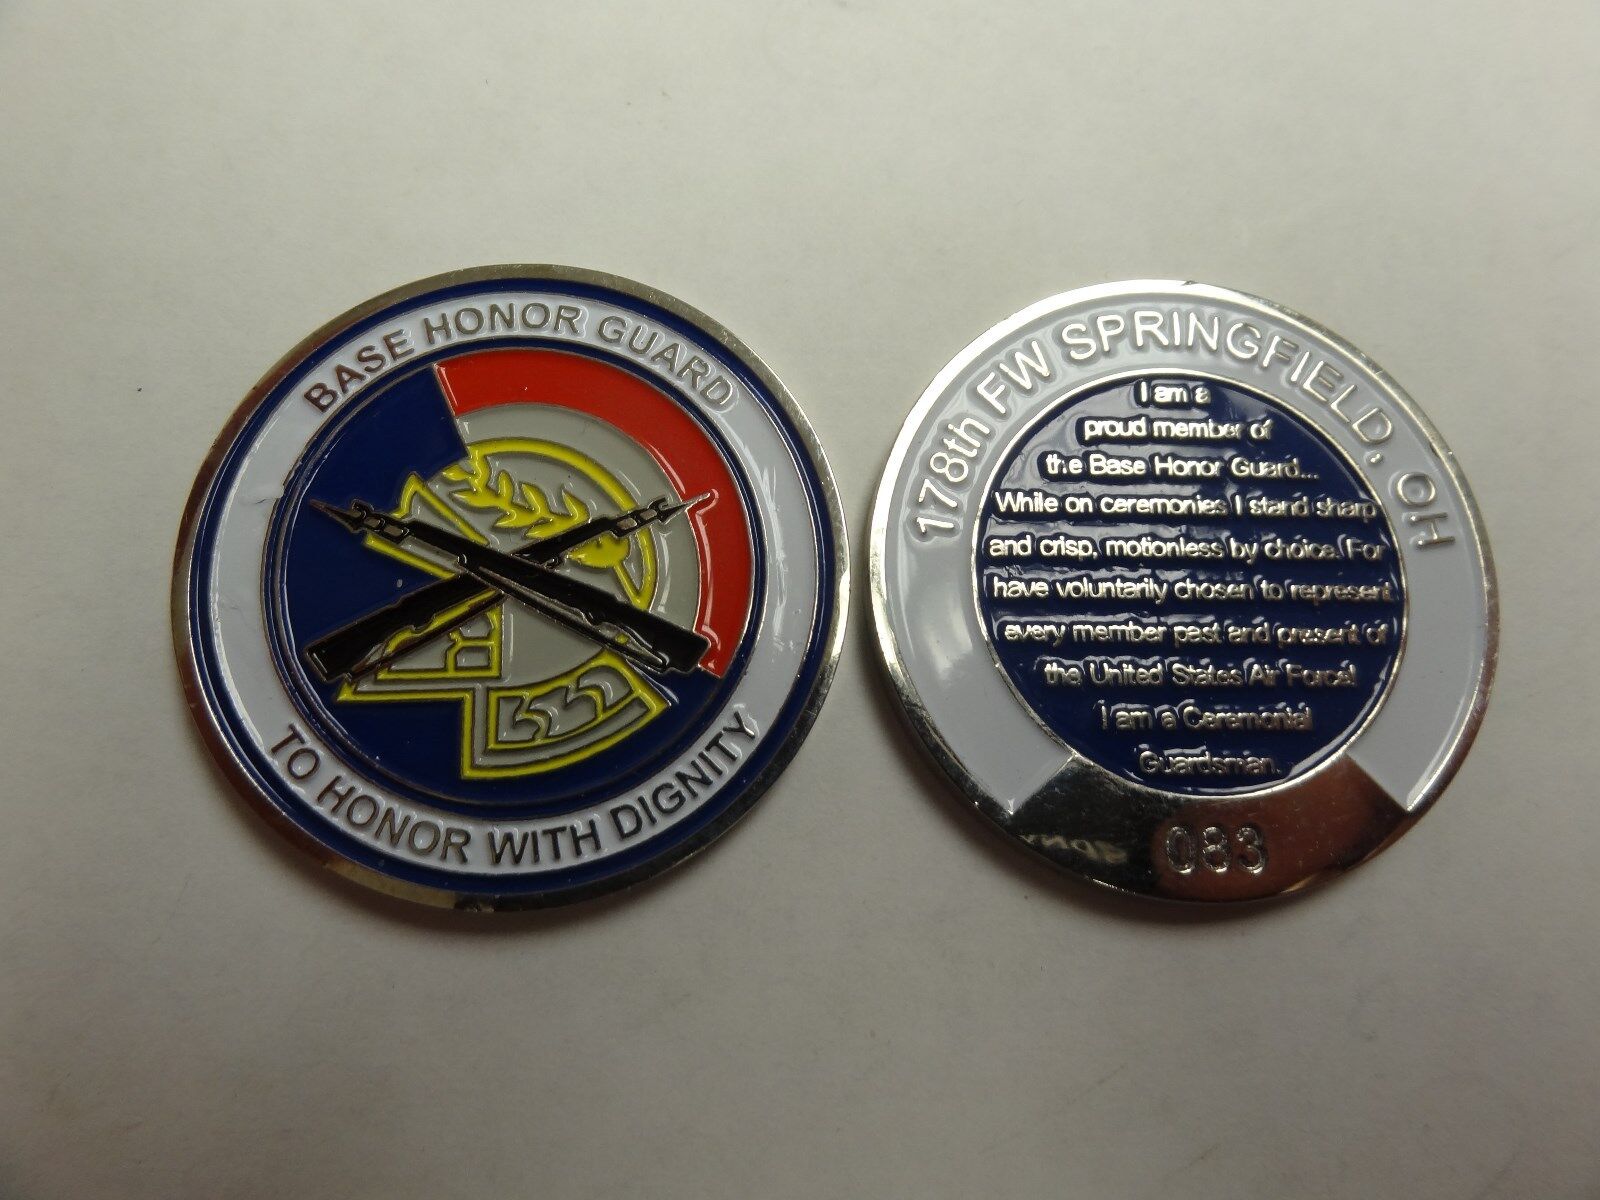 CHALLENGE COIN BASE HONOR GUARD 178TH FIGHTER WING SPRINGFIELD OHIO PROUD MEMBER